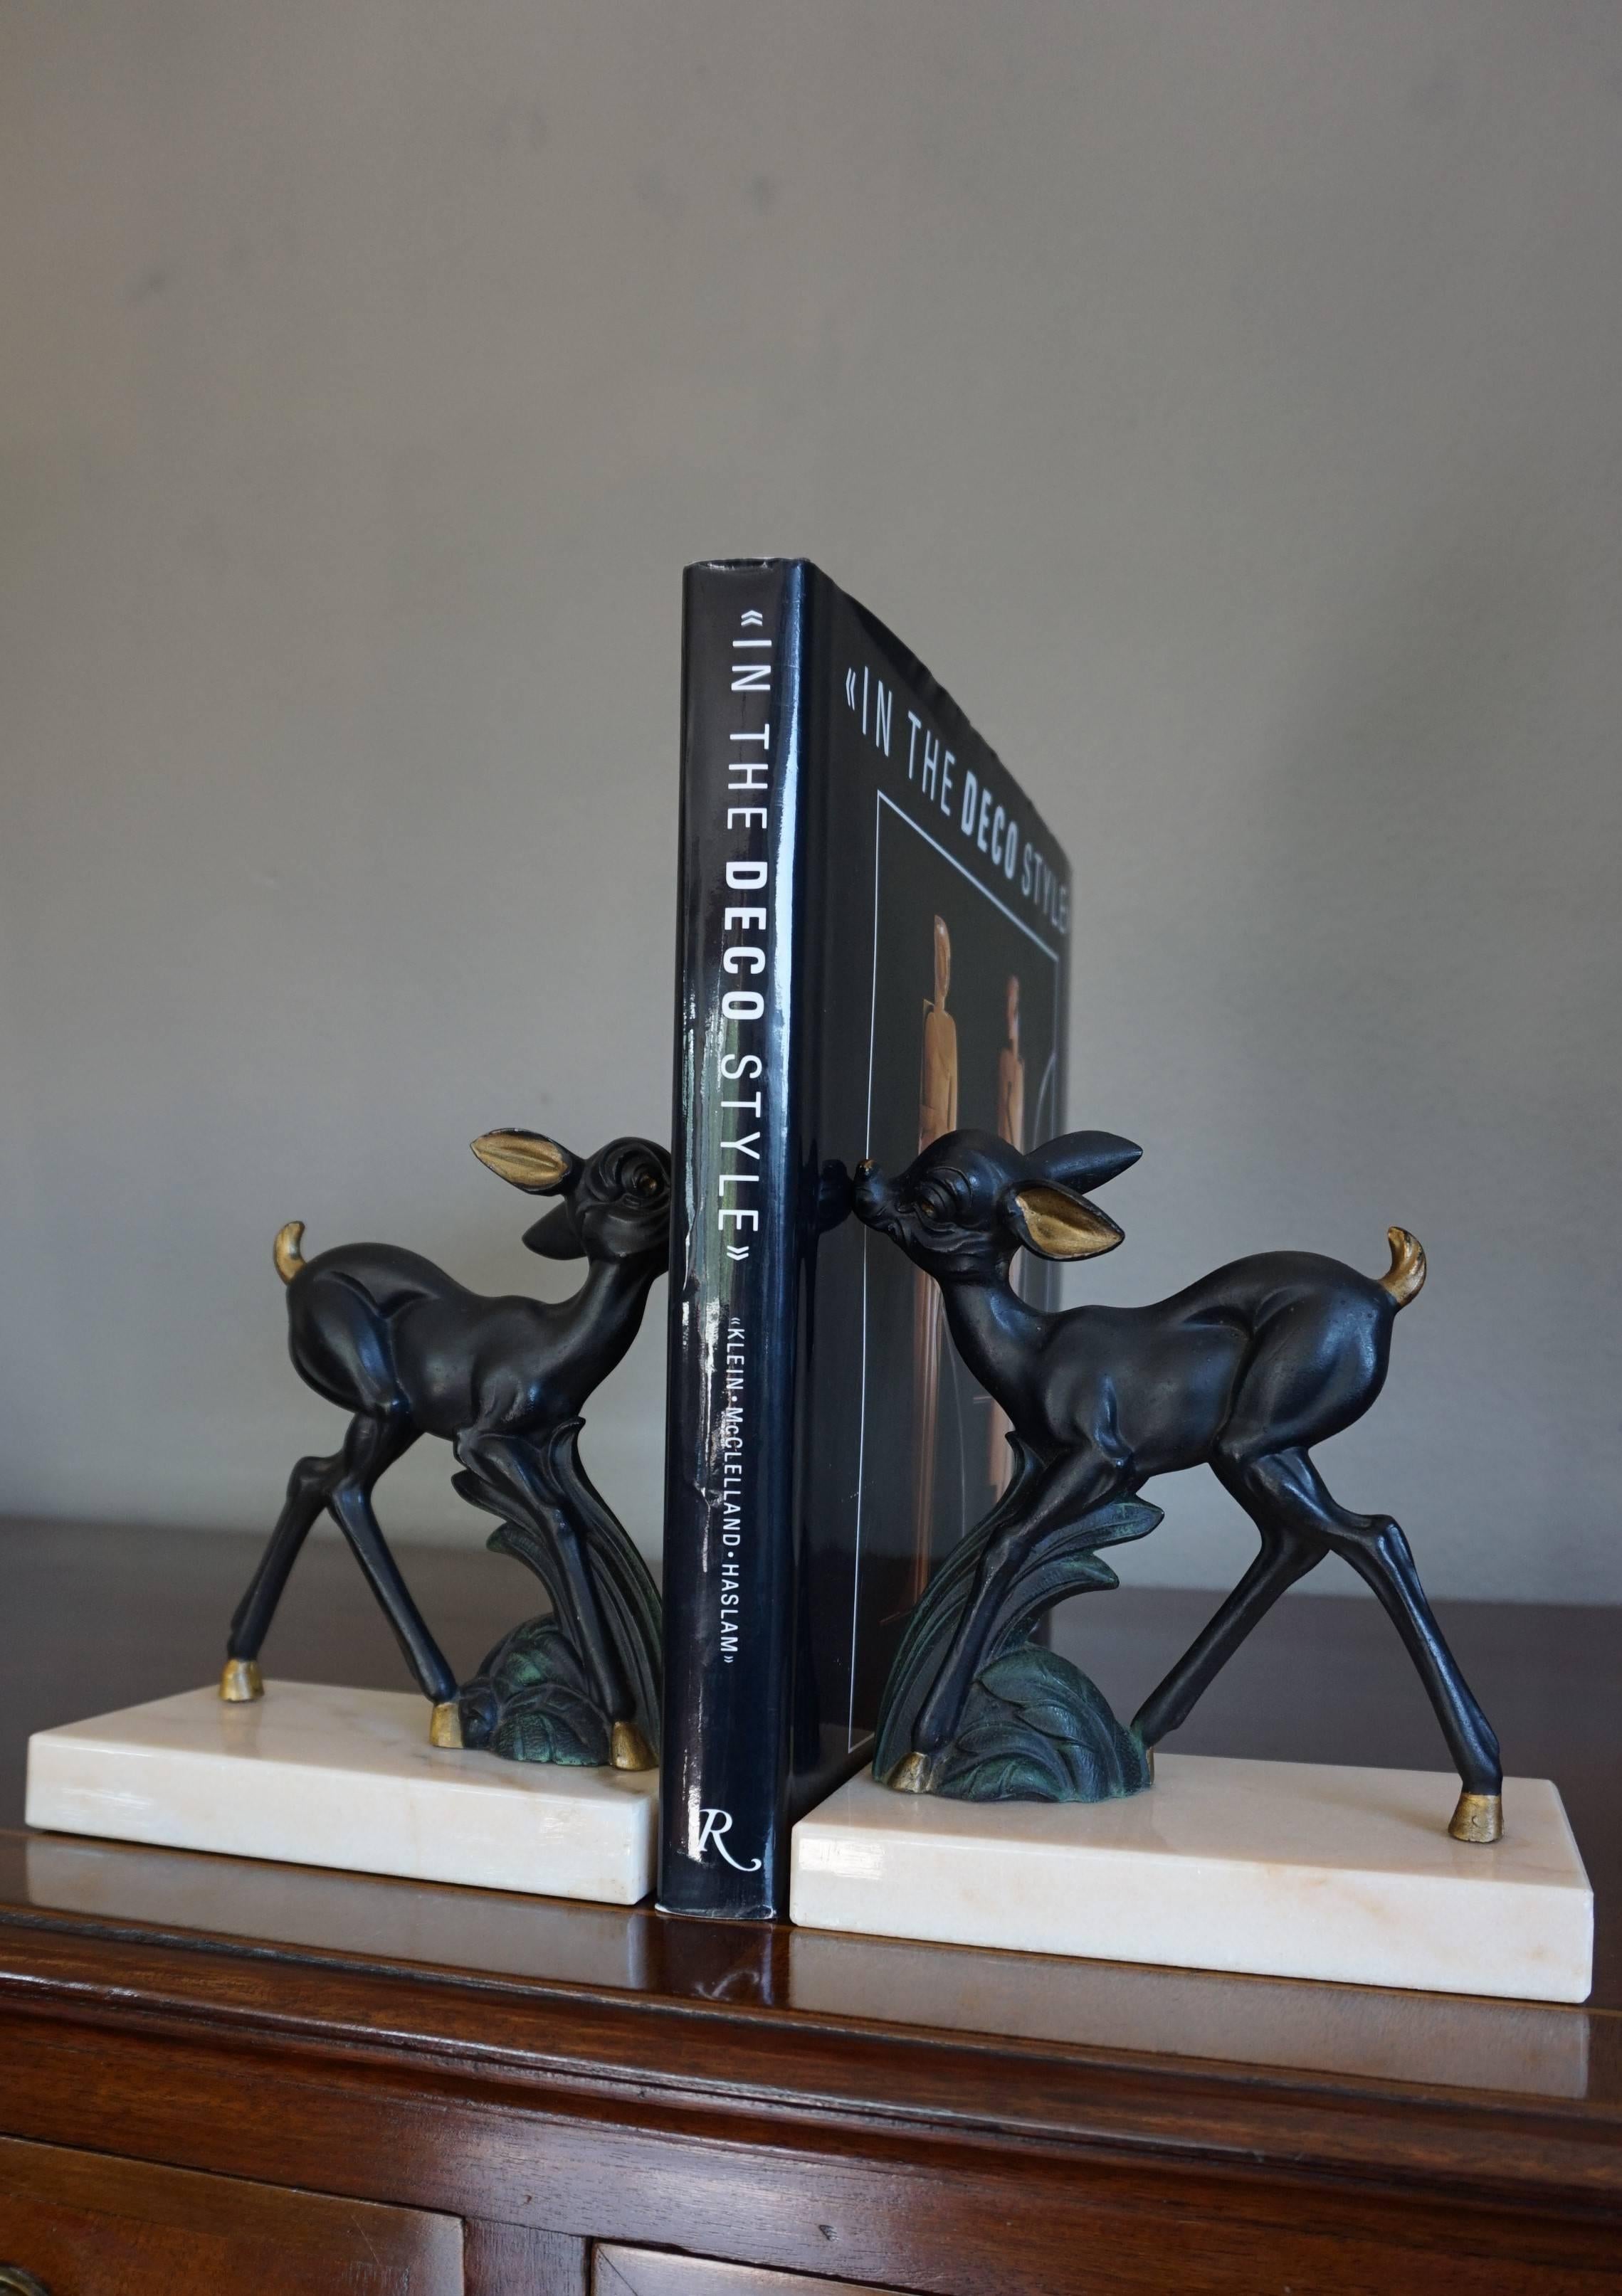 European Early 20th Century Hand-Painted Art Deco Bookends w. Bambi Like Deer Sculptures